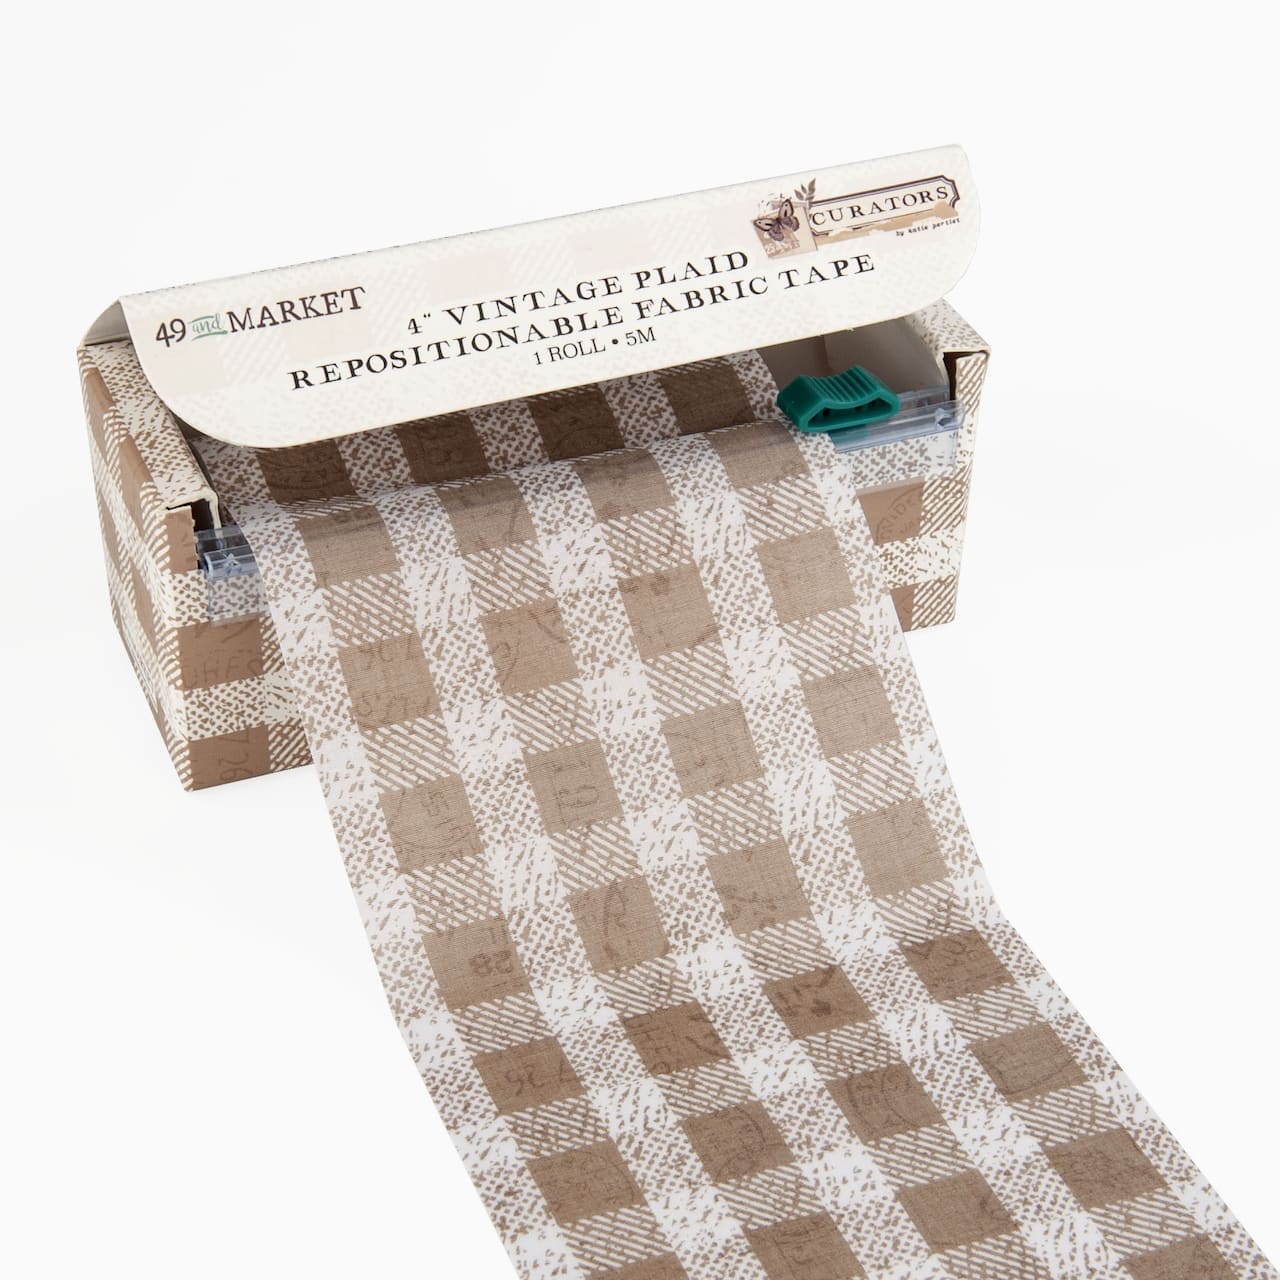 49 and Market Curators 4 Fabric Tape Roll Vintage Plaid